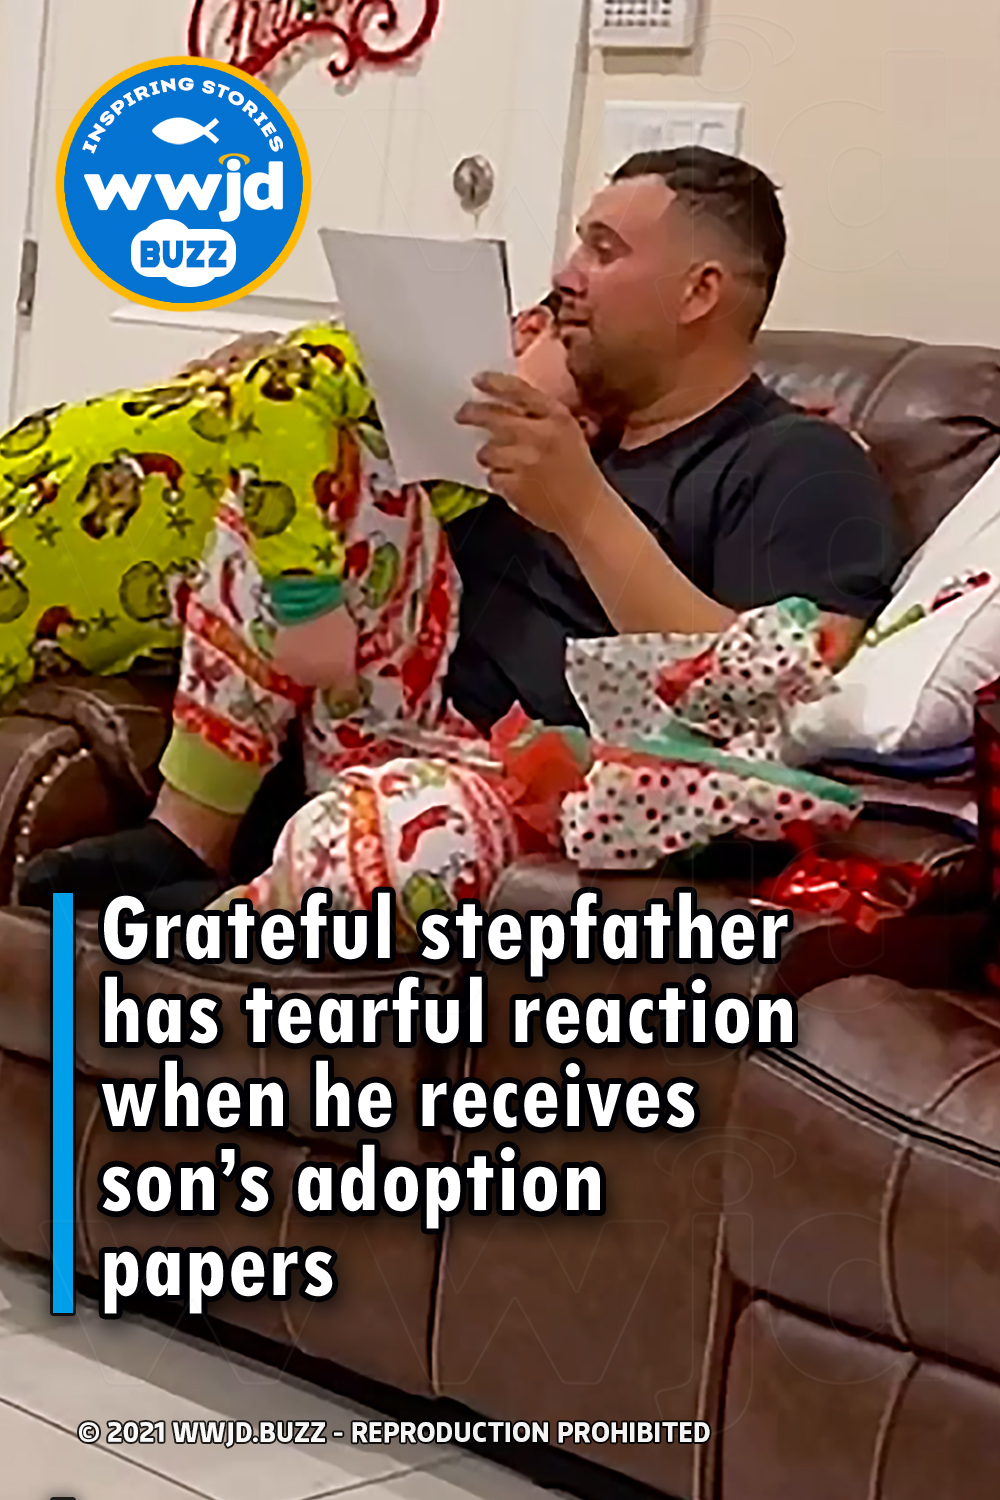 Grateful stepfather has tearful reaction when he receives son’s adoption papers